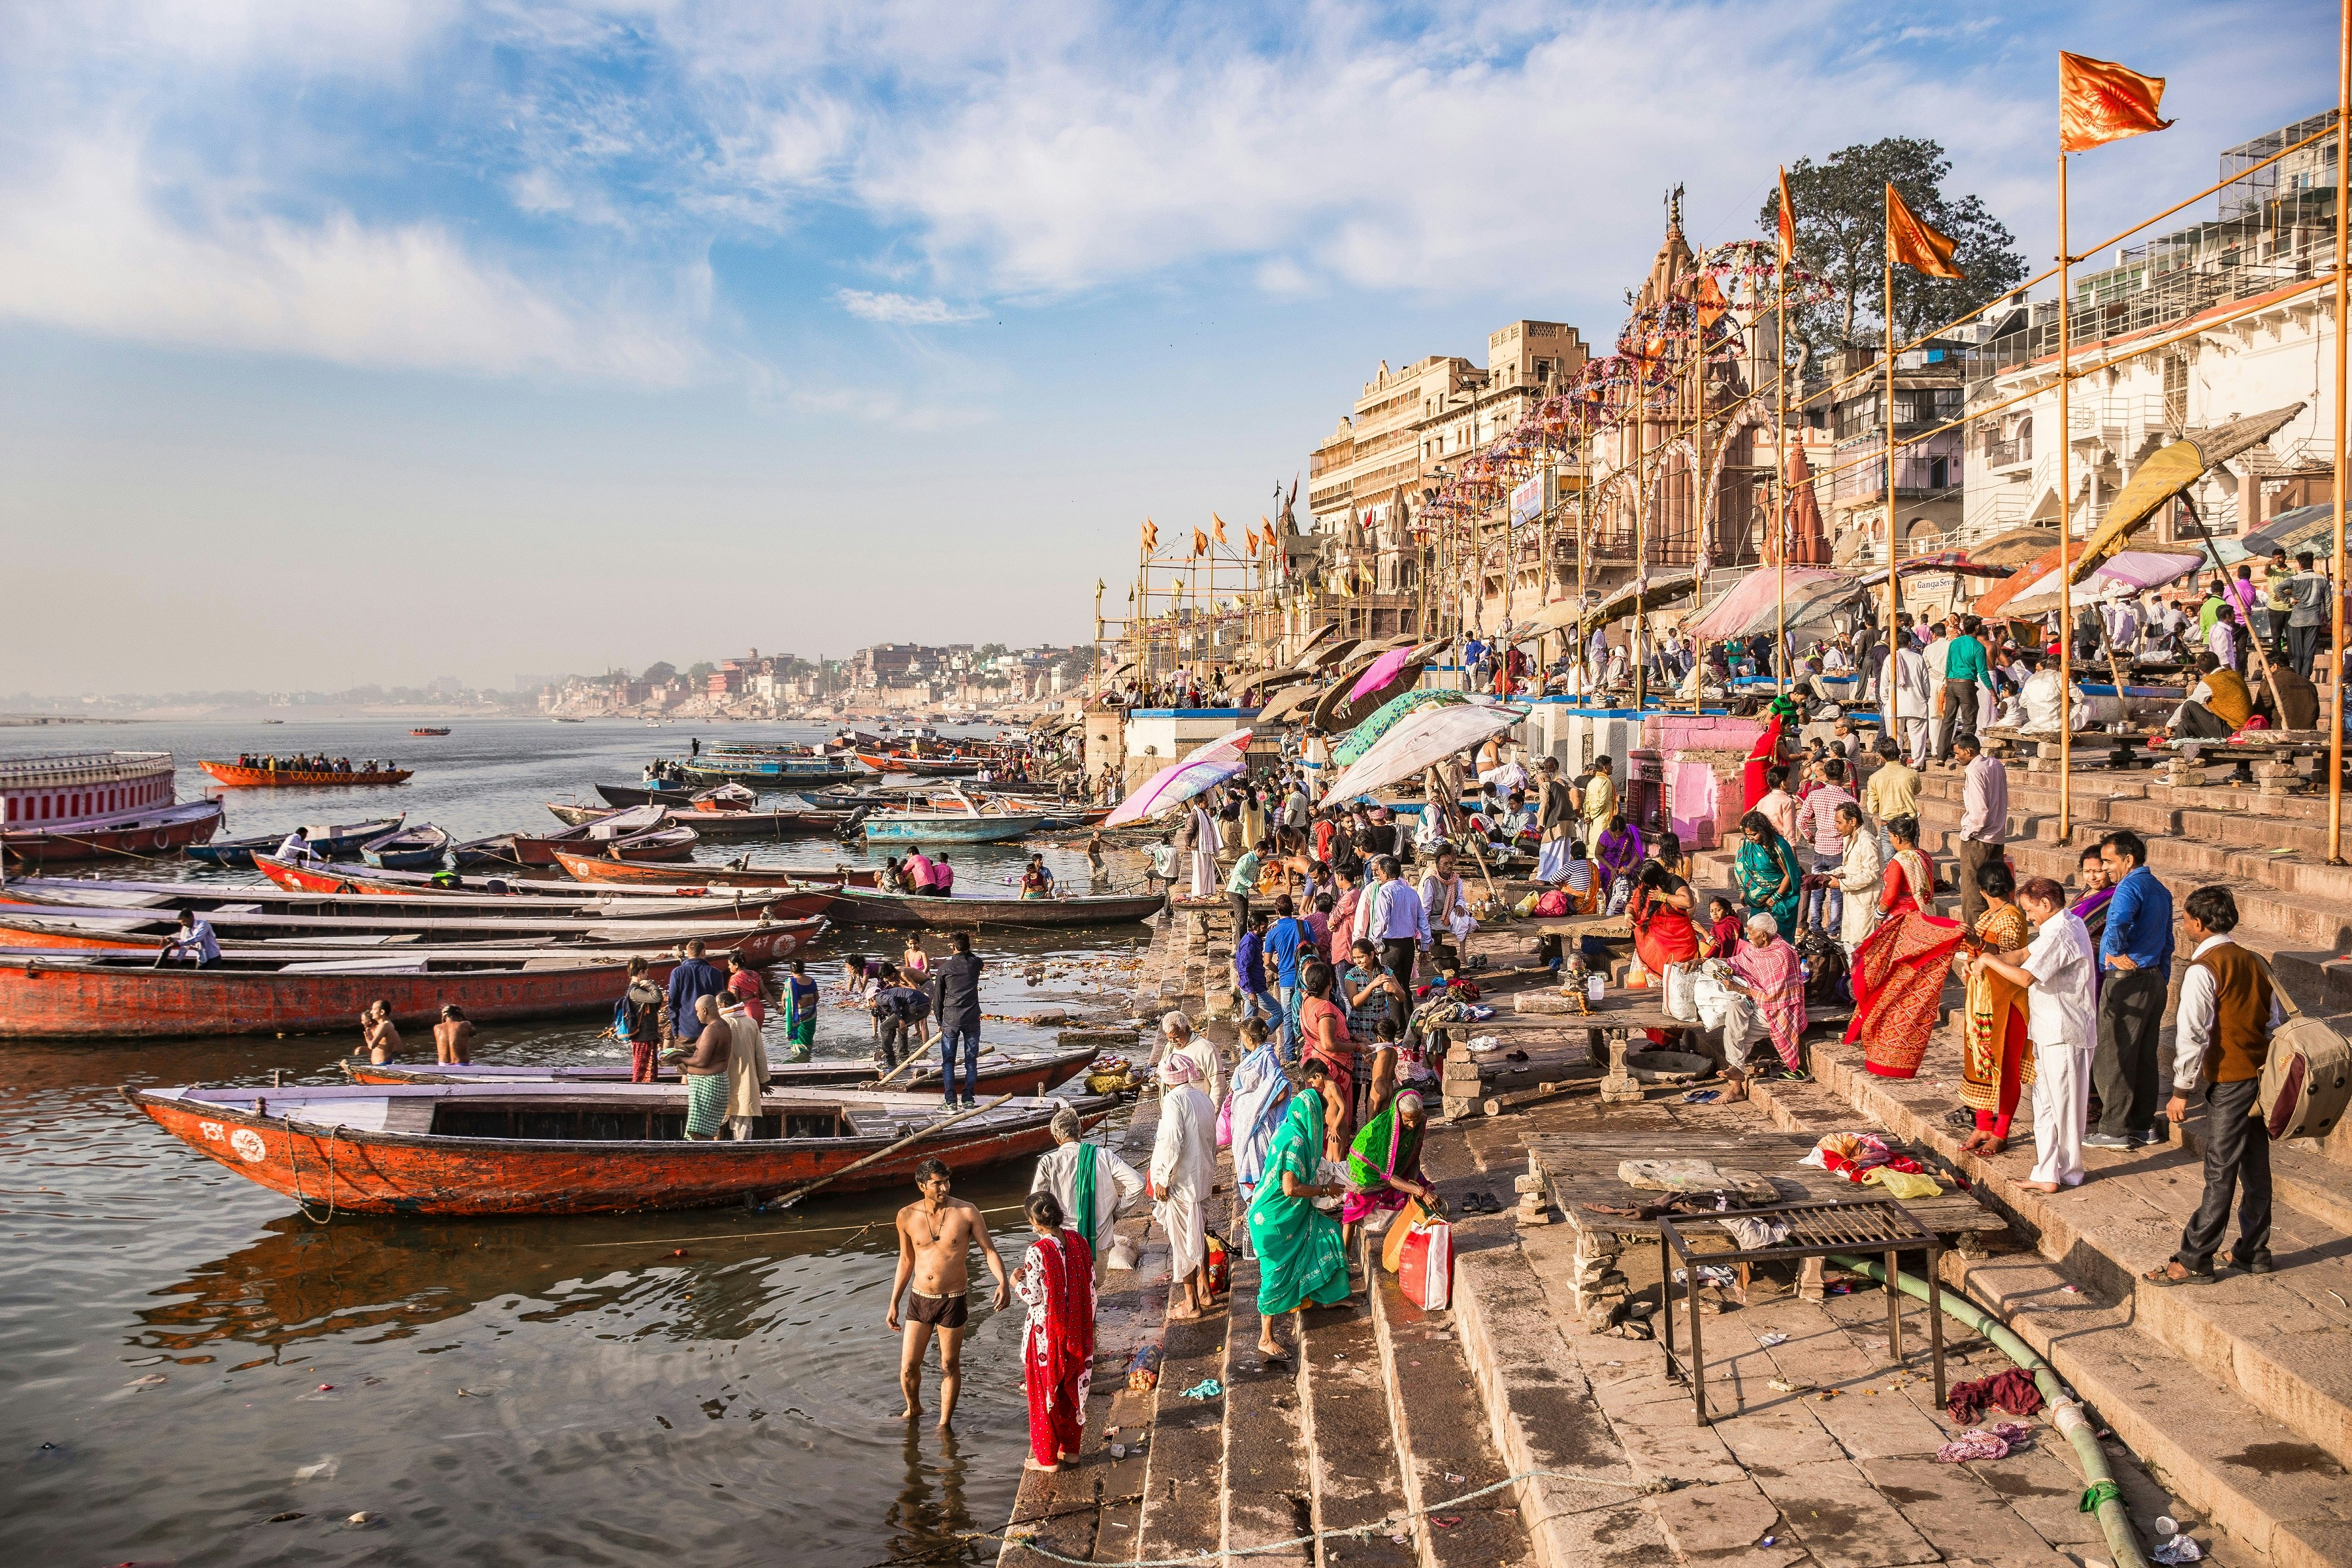 Scores of people are gathered at steps leading down to the Ganges River at Varanasi; some are standing in the water, and some are sitting in long, narrow boats moored at the water's edge.